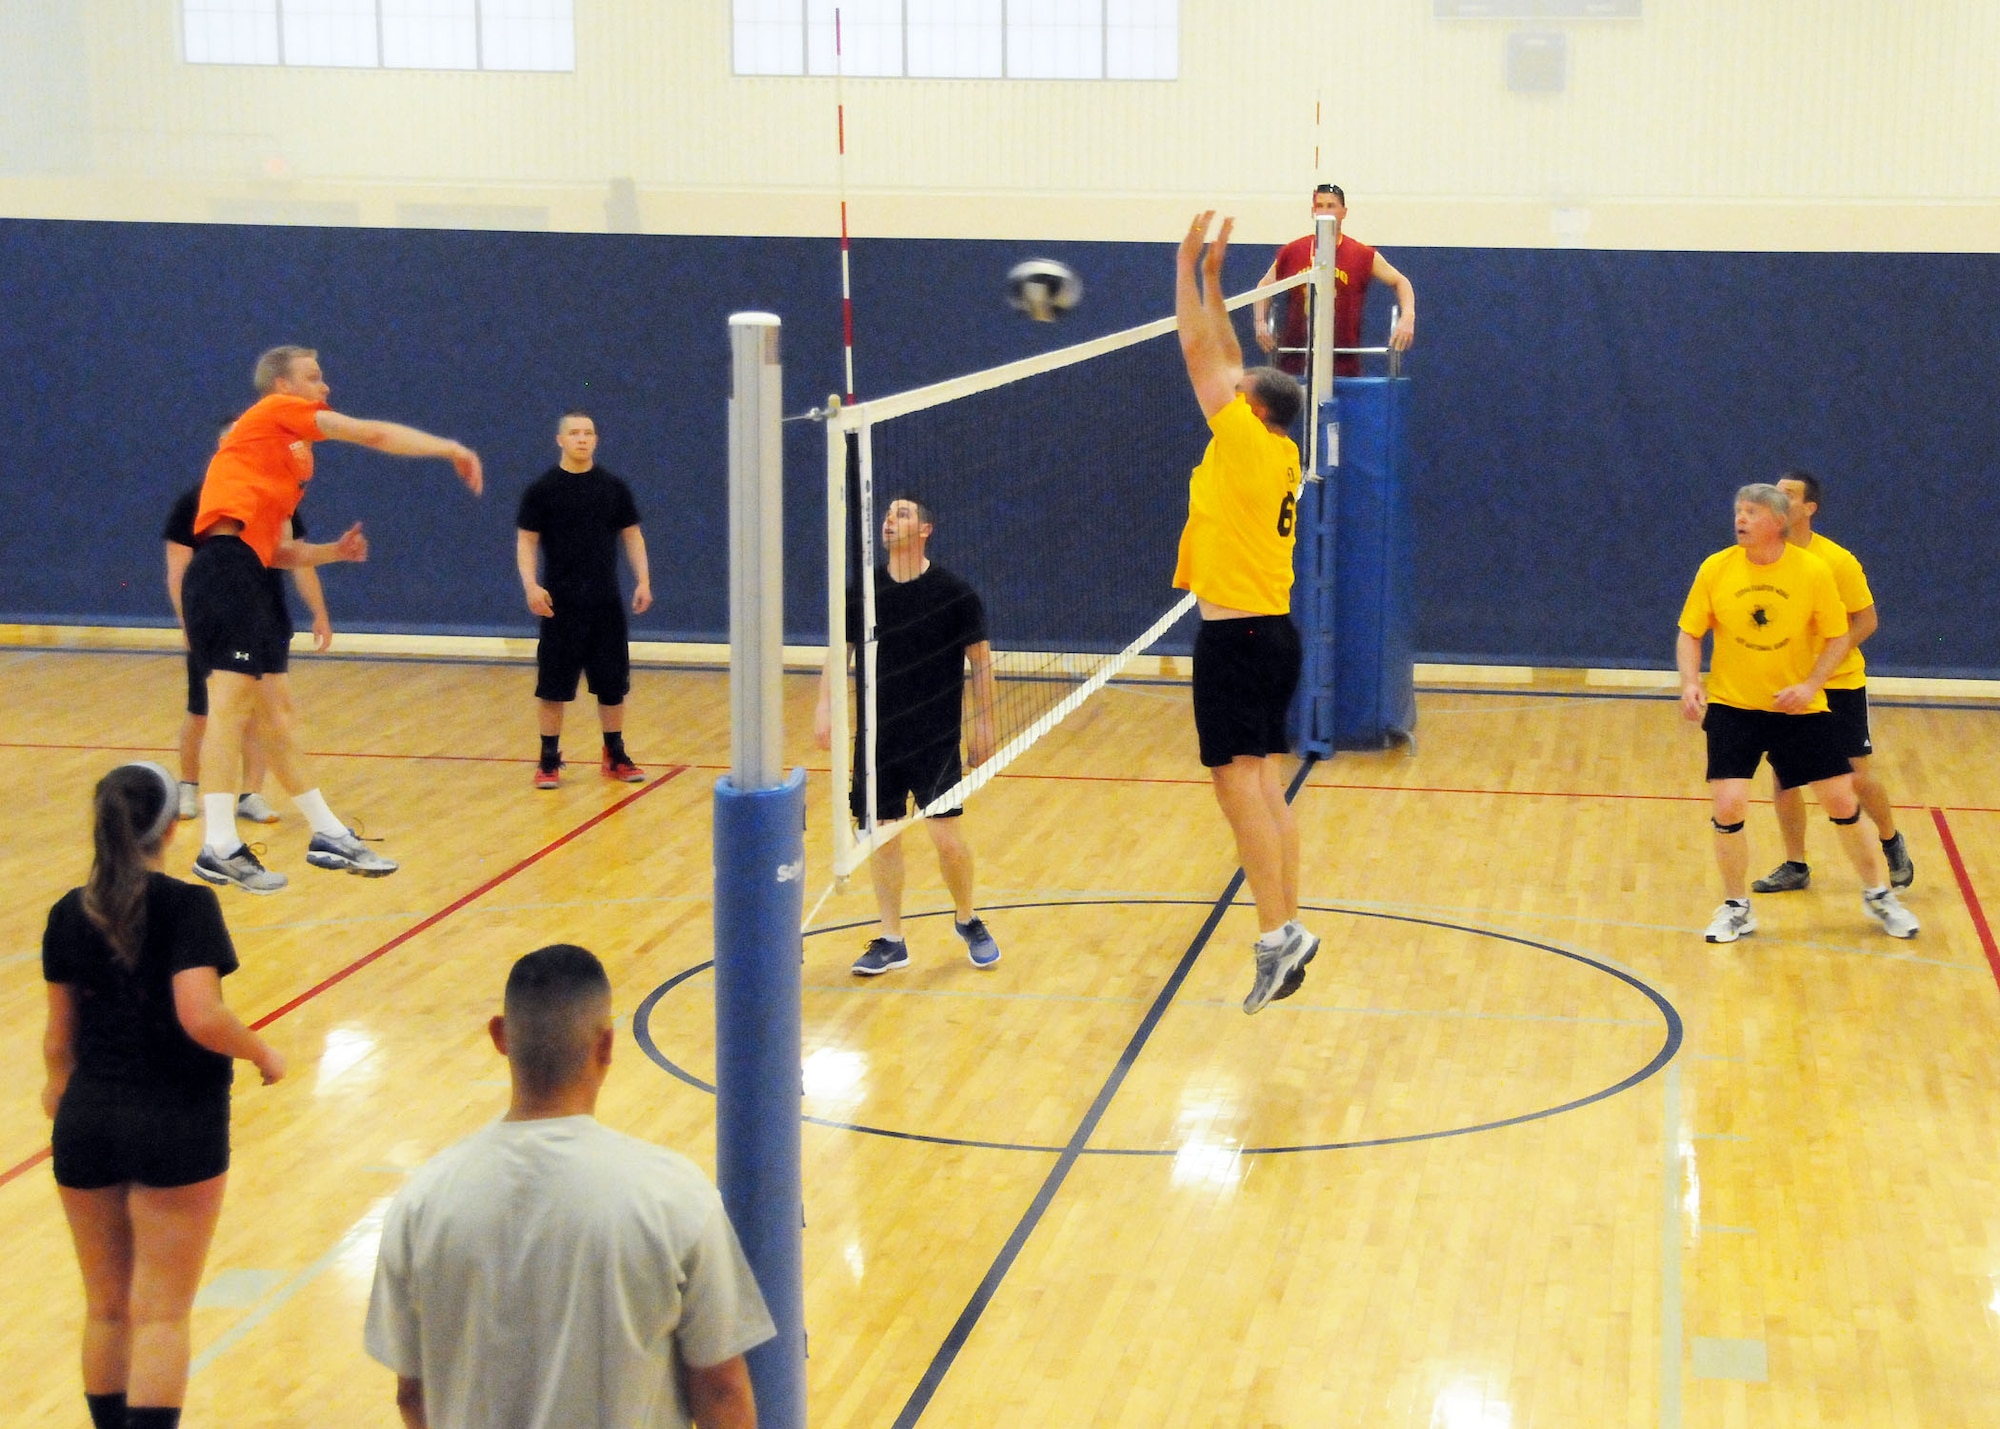 Senior Master Sgt. Steve Shovlin jumps to block a spike sent over the net by a member of the opposing team during the final Montana Air National Guard Vigilantes volleyball game played during the season playoffs held at the Malmstrom Fitness Center on May 14, 2013.  (U.S. Air Force photo/Senior Master Sgt. Eric Peterson)